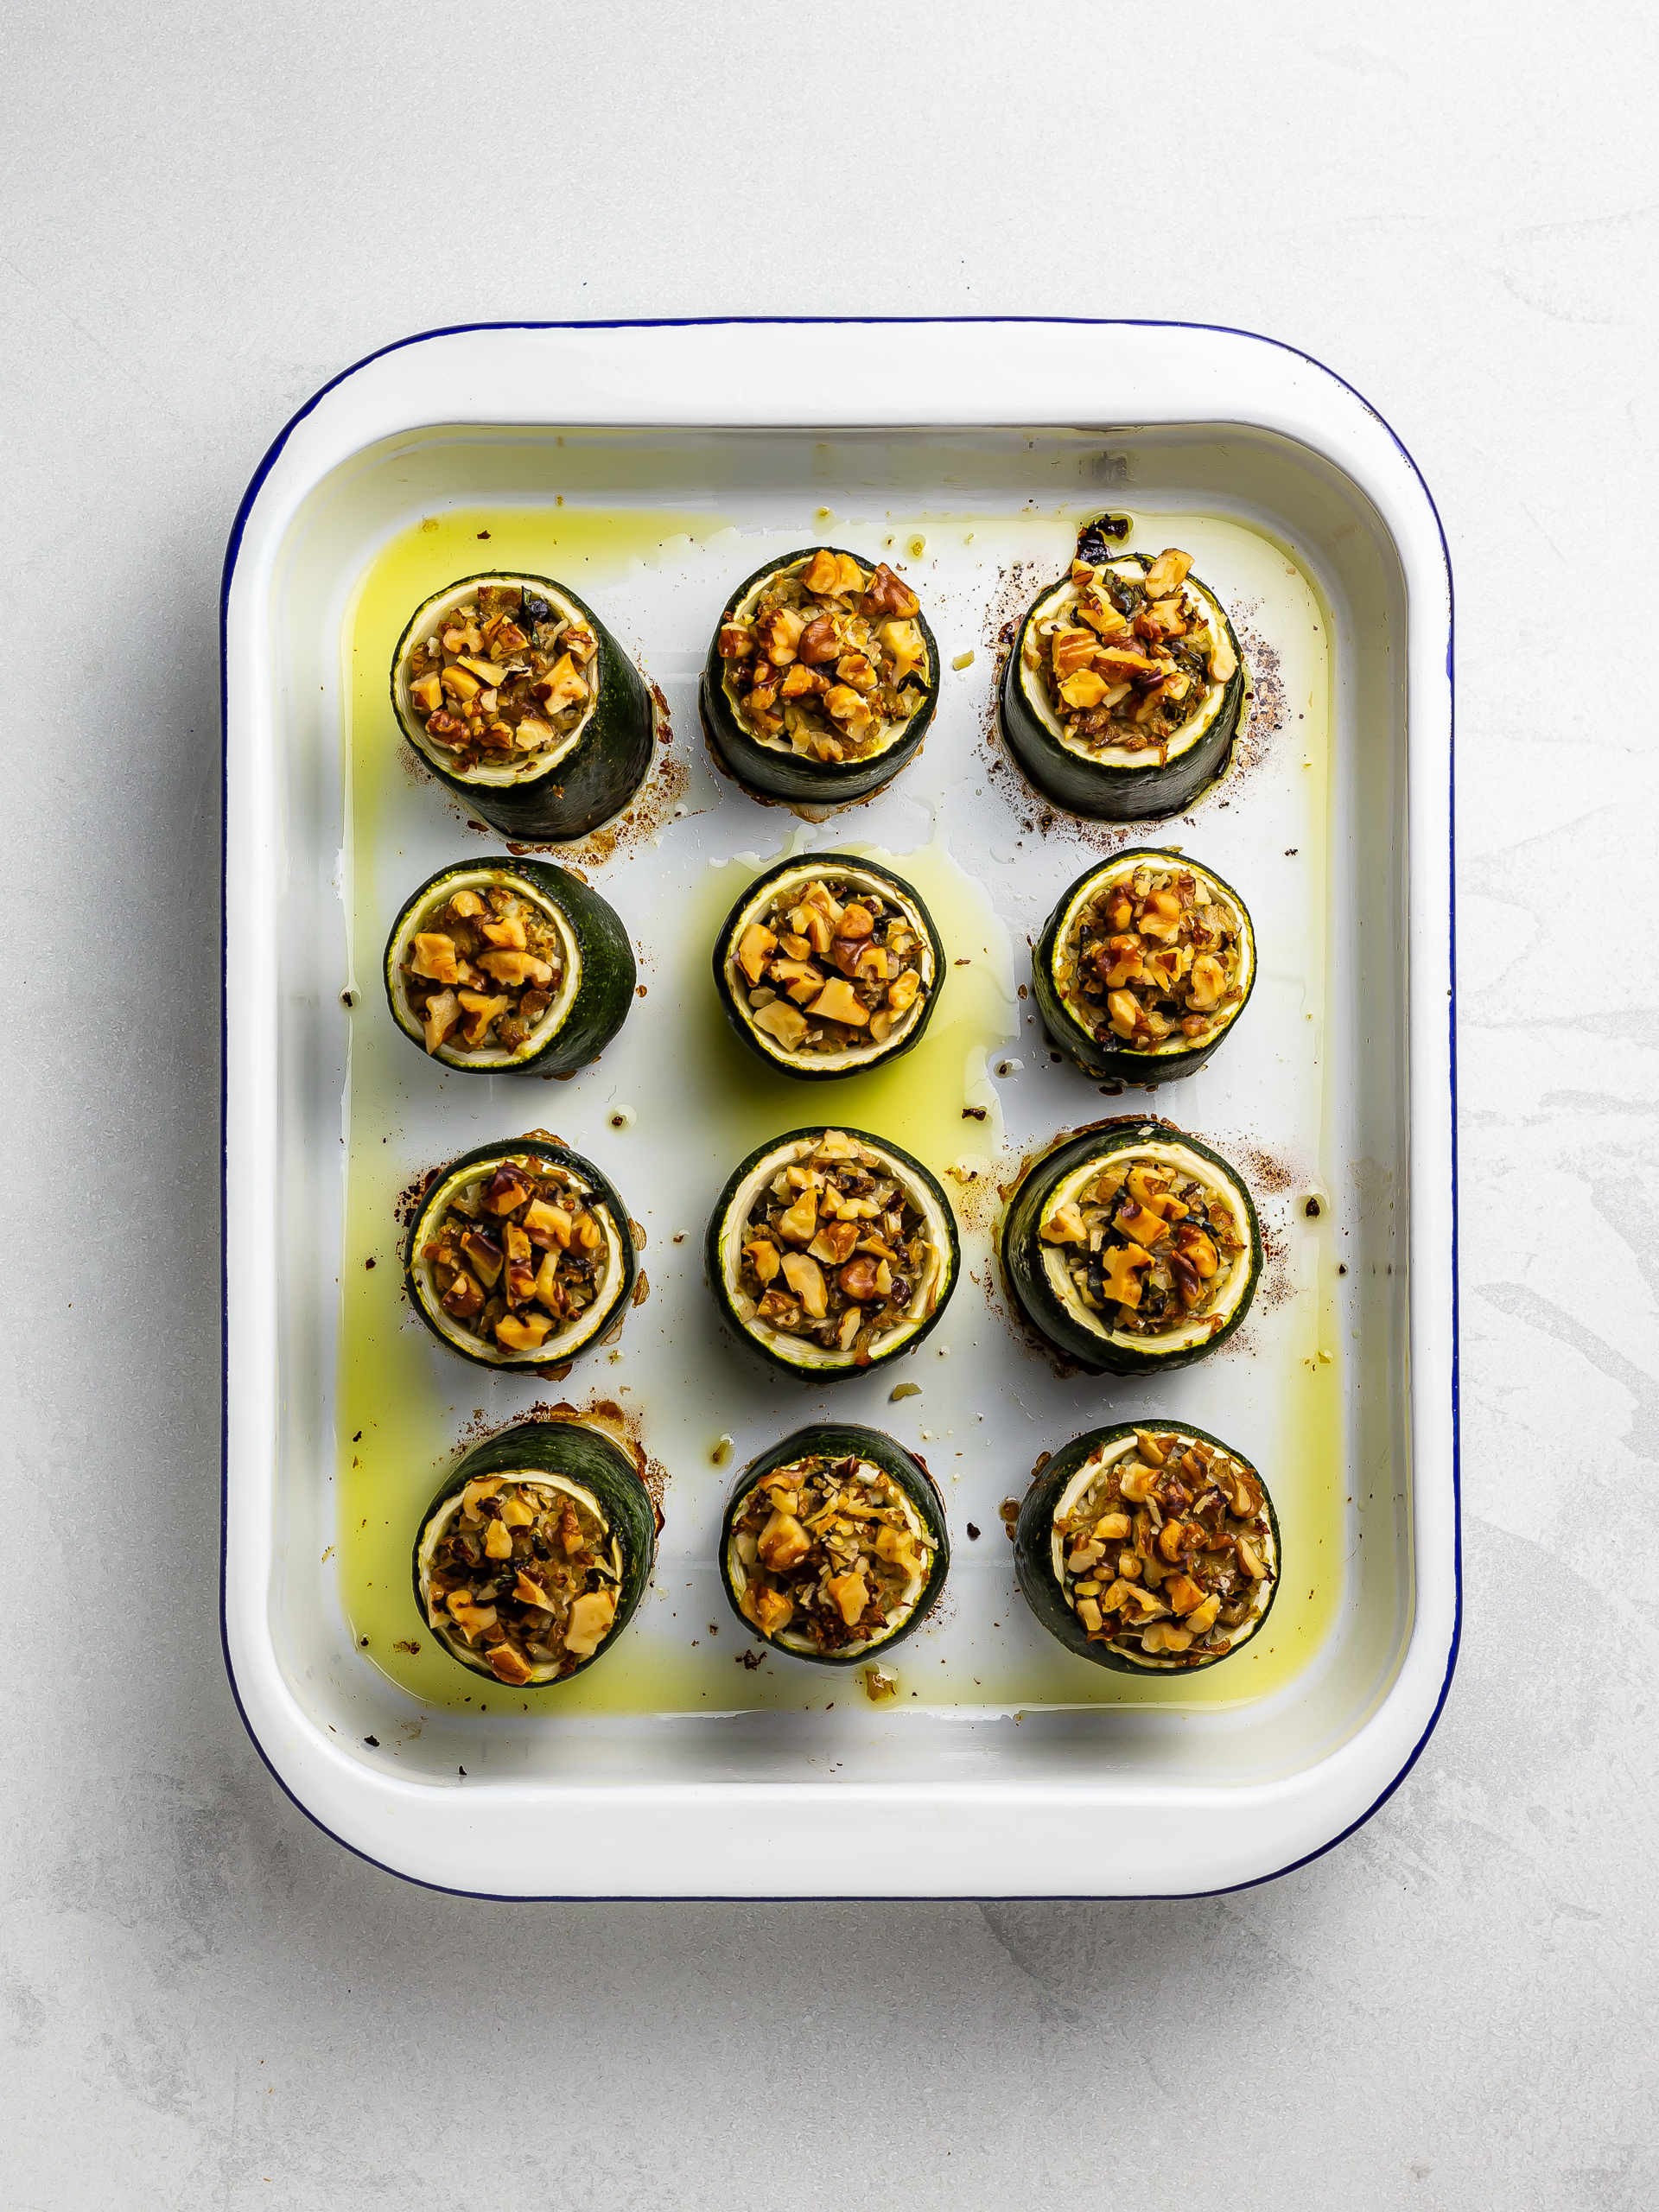 oven baked stuffed zucchini cups in a tray